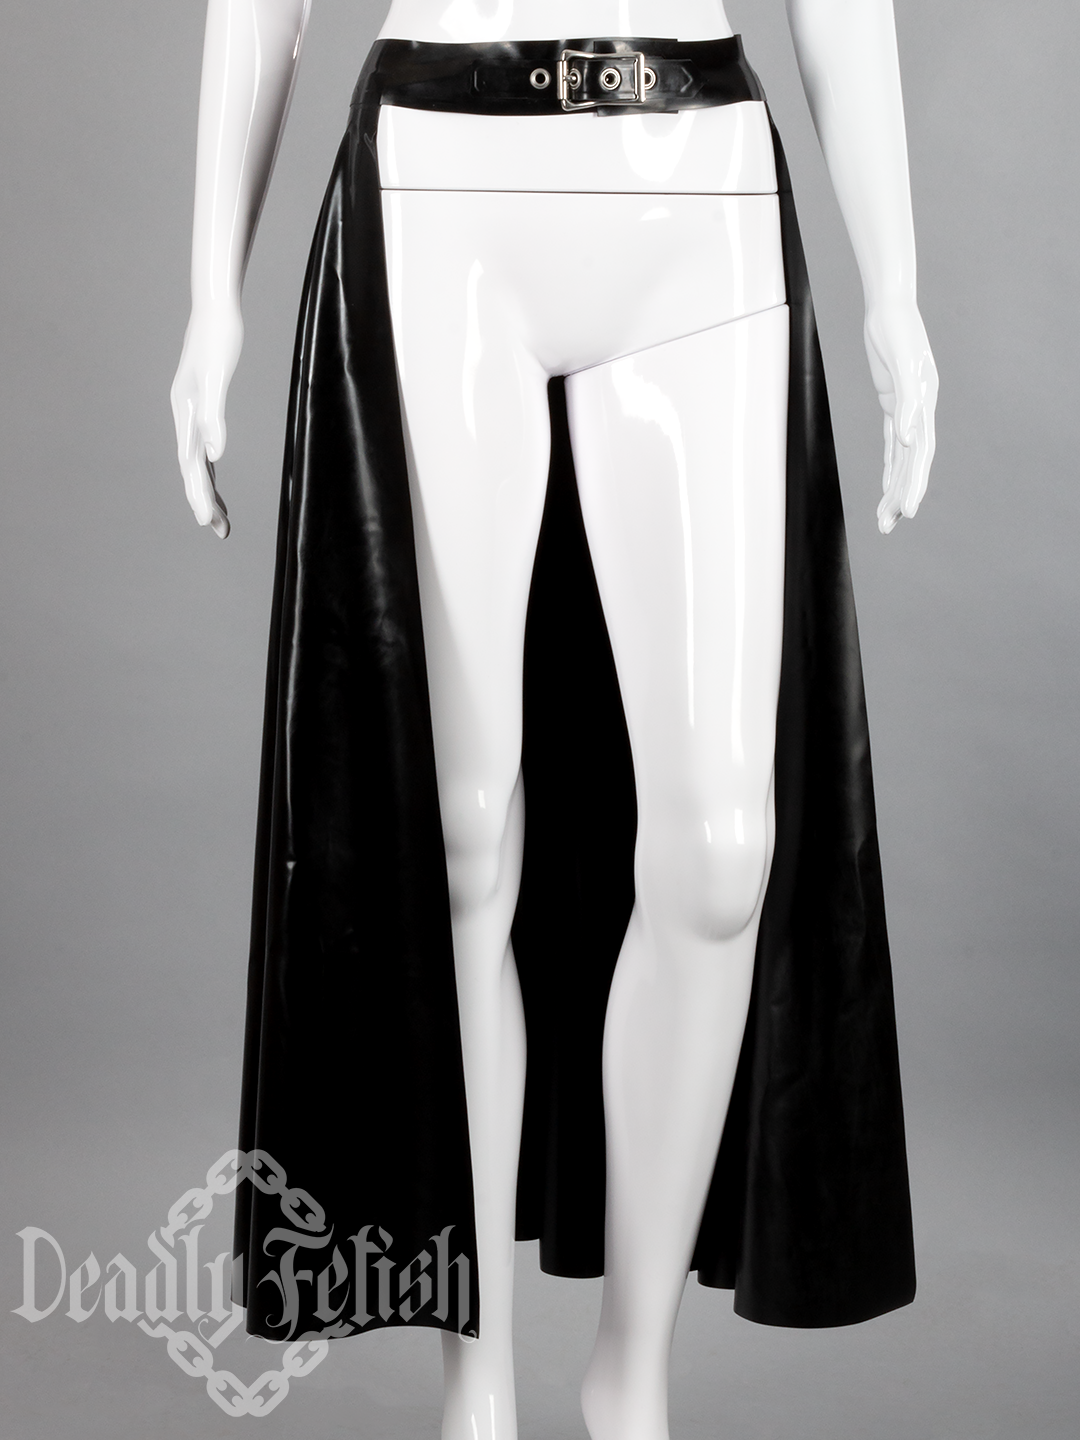 Deadly Fetish Made-to-Order Latex: Skirt #20